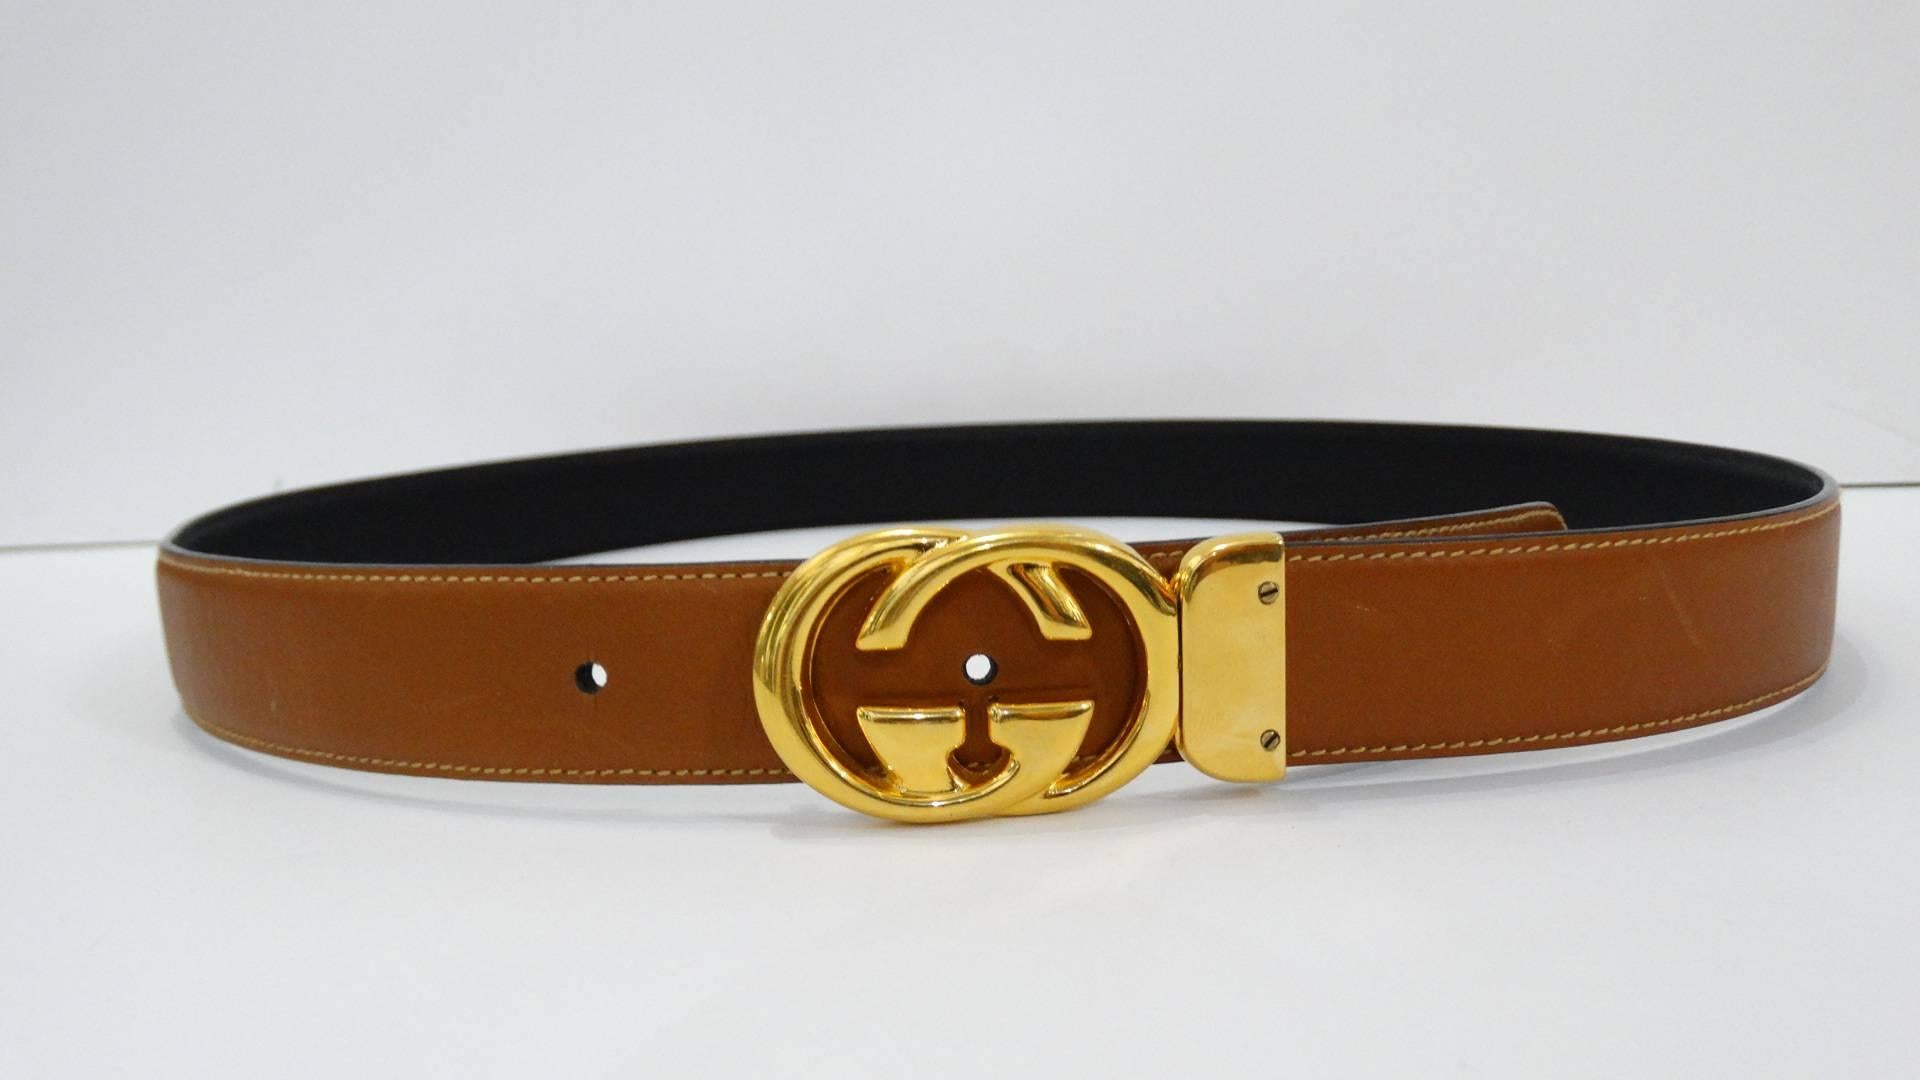 Score yourself a piece of classic Gucci with this amazing reversible Marmont belt from the 1980s! Signature Gucci GG buckle cast in a brilliant gold metal, turns to either side for reversible wear. Double sided belt with tan leather on the exterior